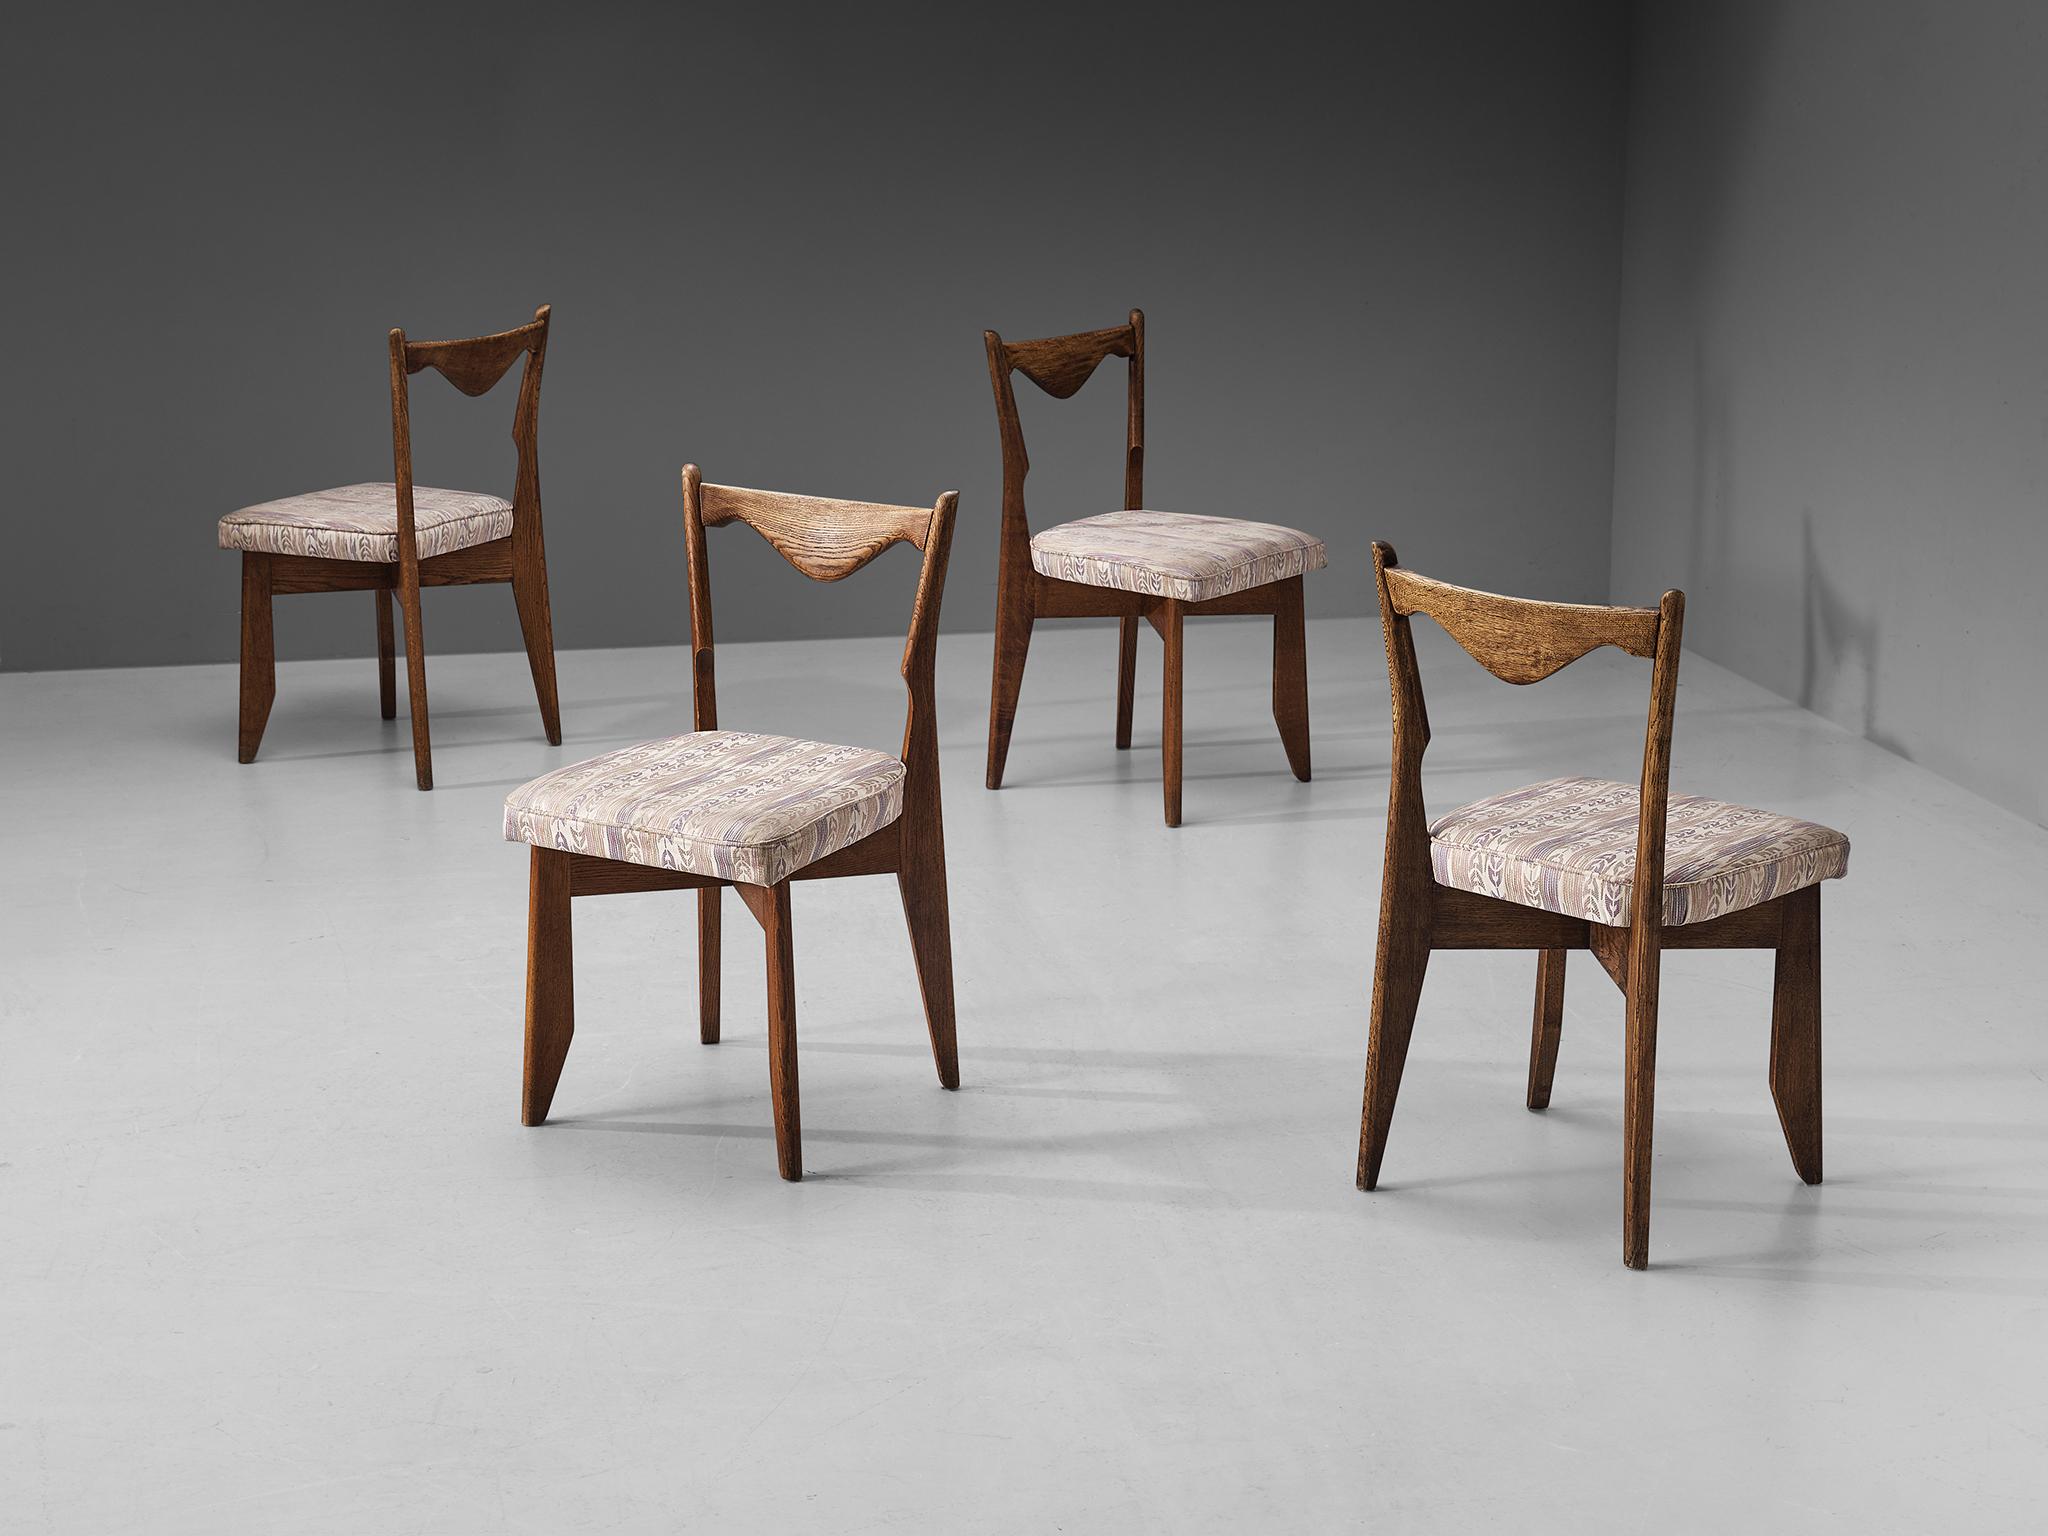 Guillerme et Chambron, dining chairs, oak, fabric, France, 1960s

Set of four dining chairs in solid oak by Guillerme and Chambron. These chairs show the characteristic frame of this French designer duo. They feature sturdy and tapered legs and a